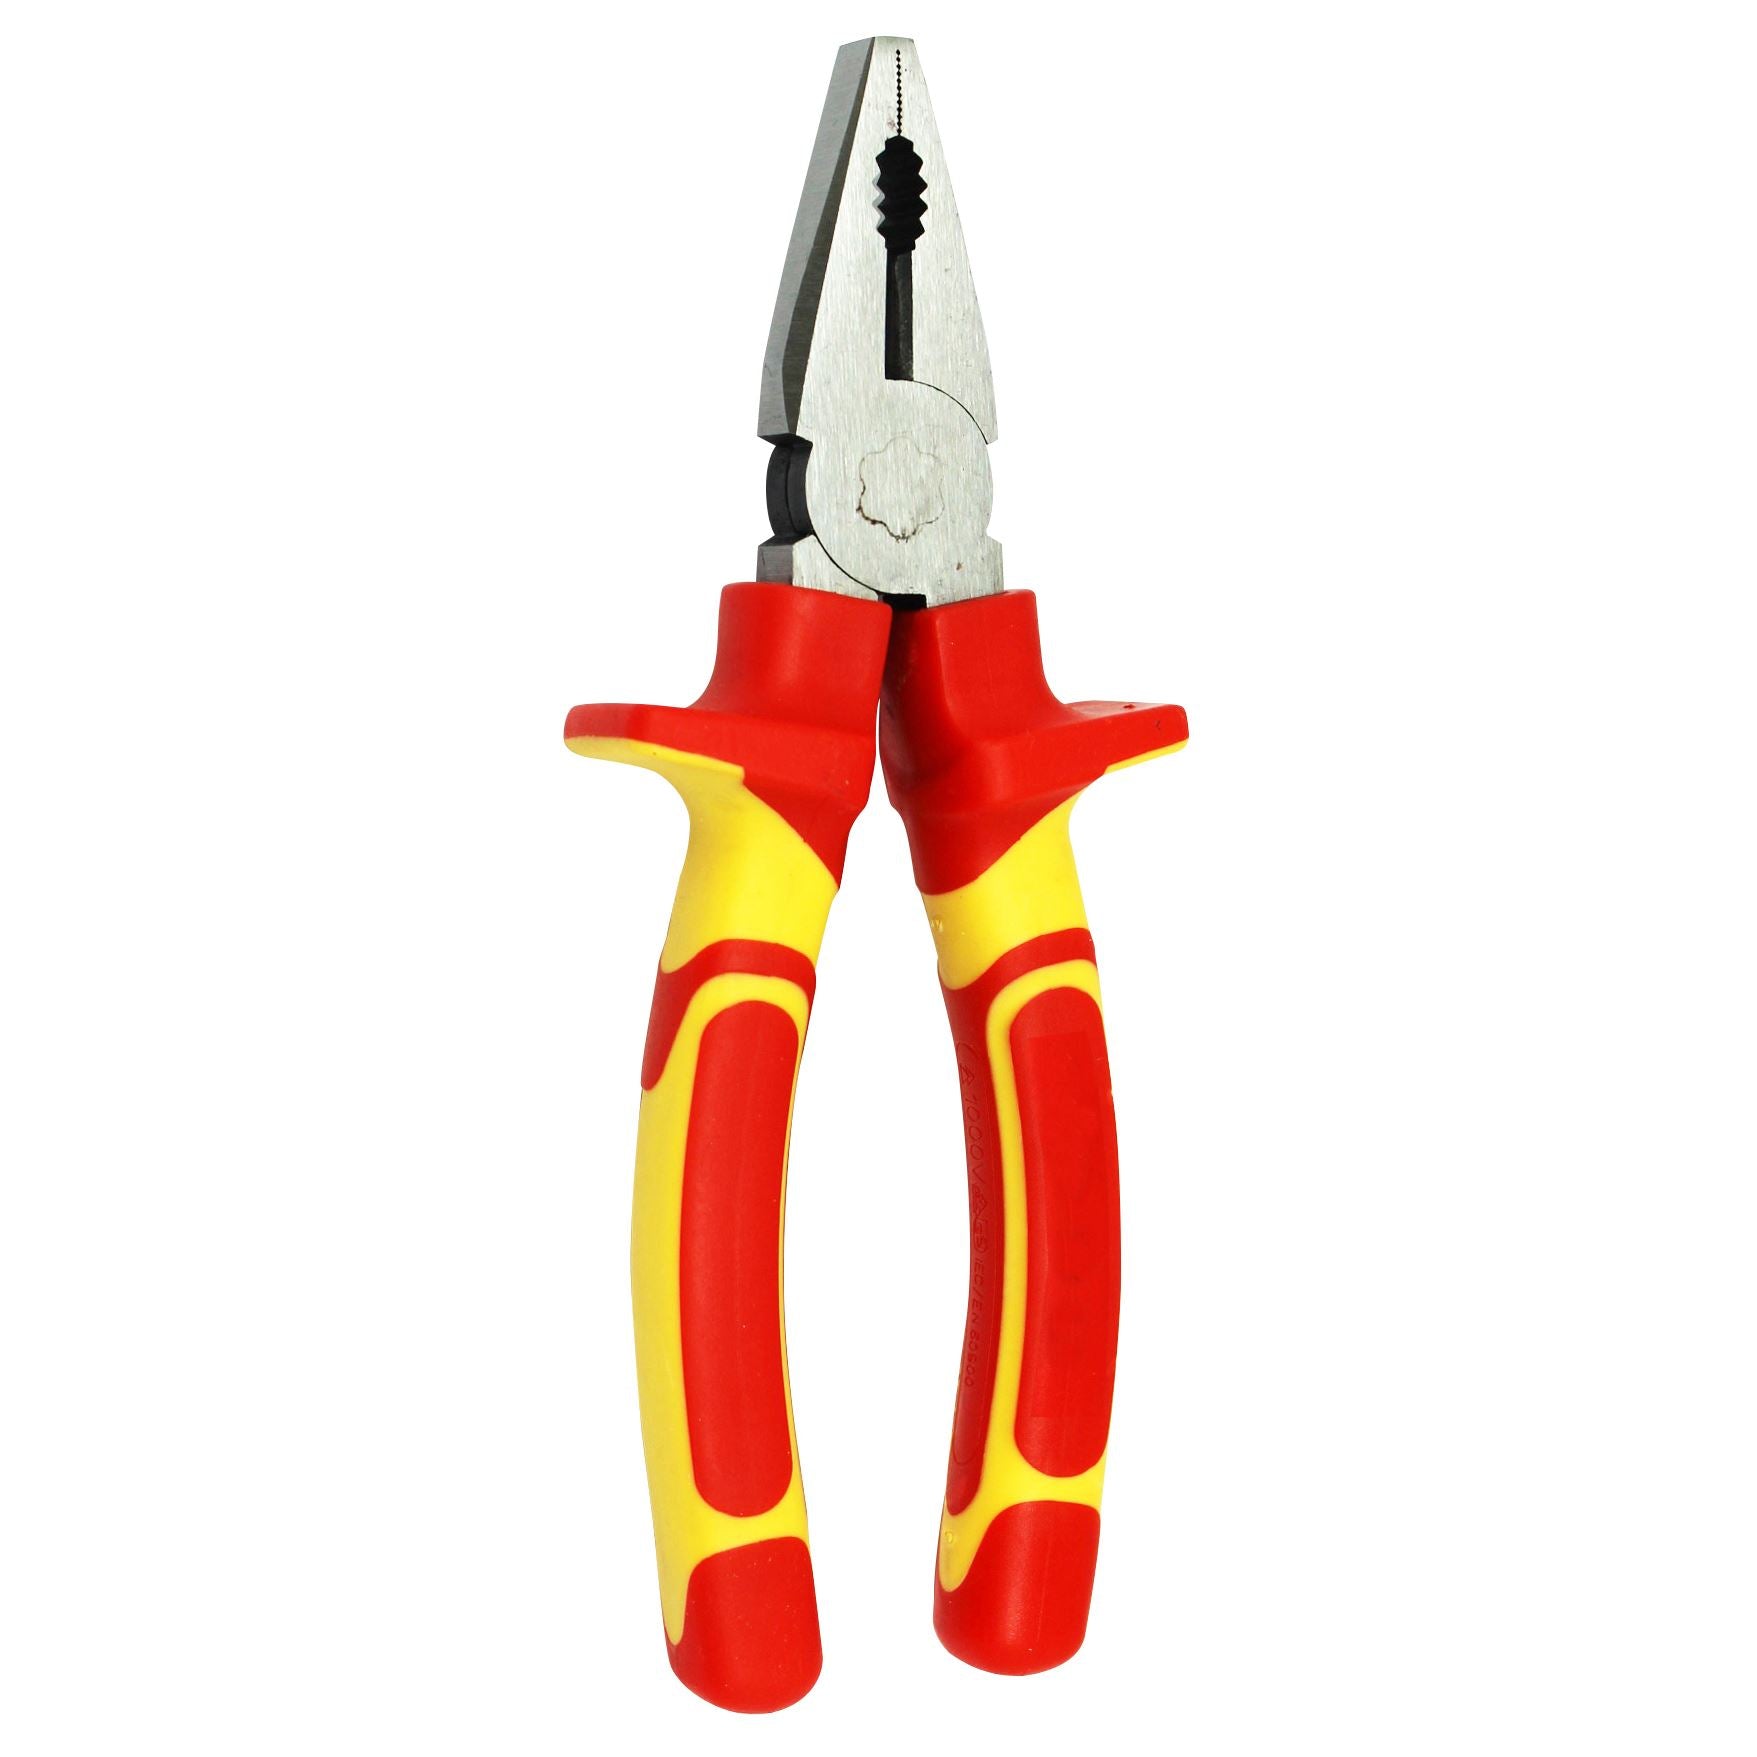 GOLDTOOL_175mm_Insulated_Wire_Clamp_Pliers._Large_Shoulders_to_Protect_Against_Live_Contacts._Rubber_Easy_Grip_Handles_for_Greater_Comfort._Red/Yellow_Colour